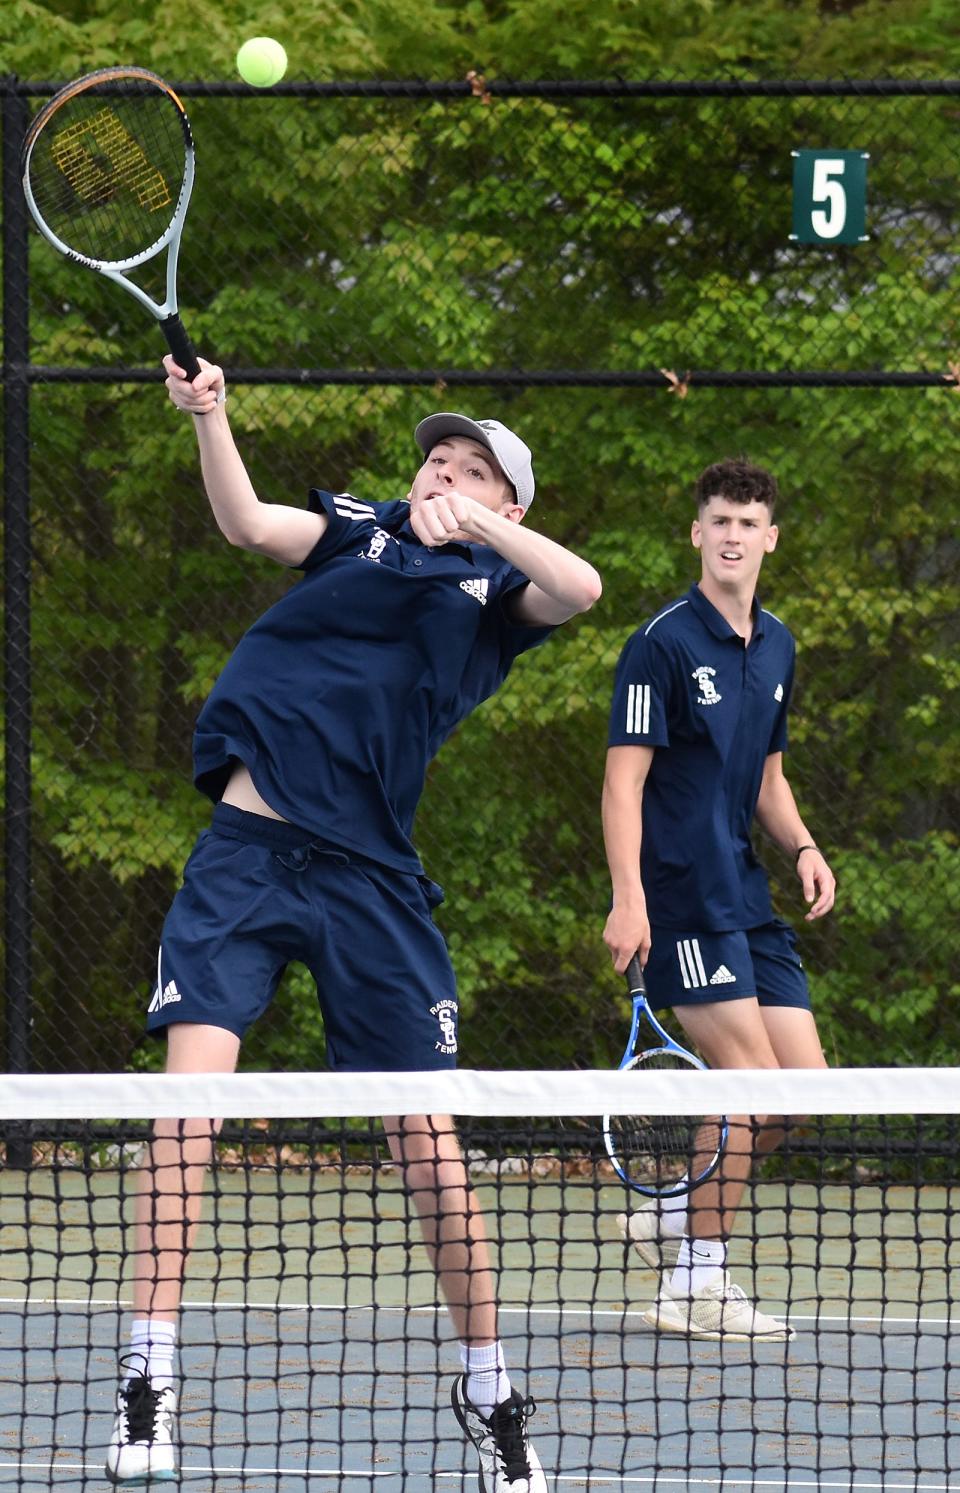 Somerset Berkley second double players Ian Jepson leaps high for a shot in the front as teammate Ian Sullivan watches in Thursday's match against Seekonk at Chapman's Court in Somerset..